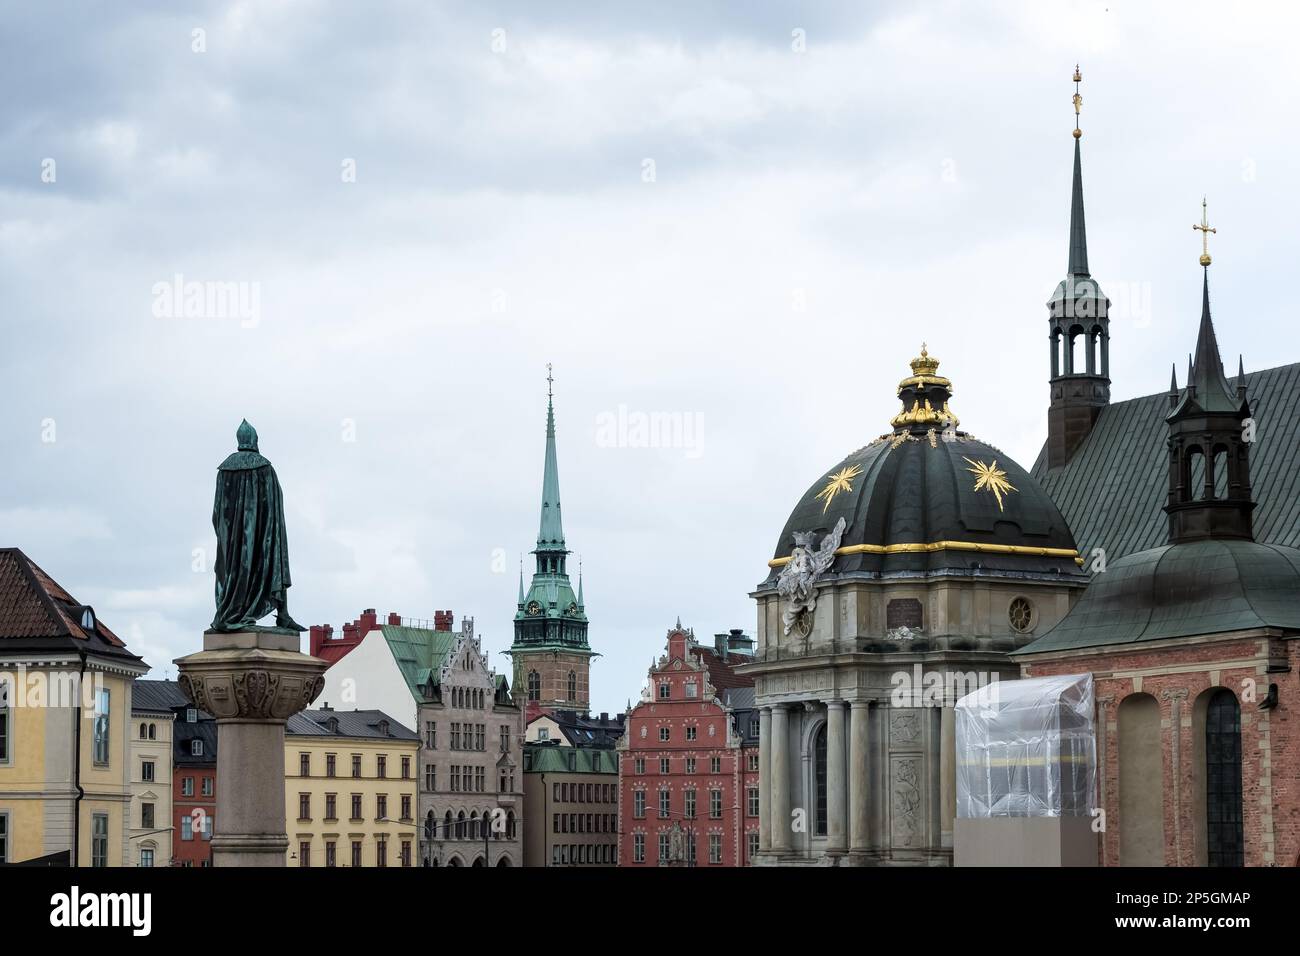 Skyline of Gamla Stan, medieval city center of Stockholm, Sweden, from Riddarholmen Church, final resting place of most Swedish monarchs Stock Photo